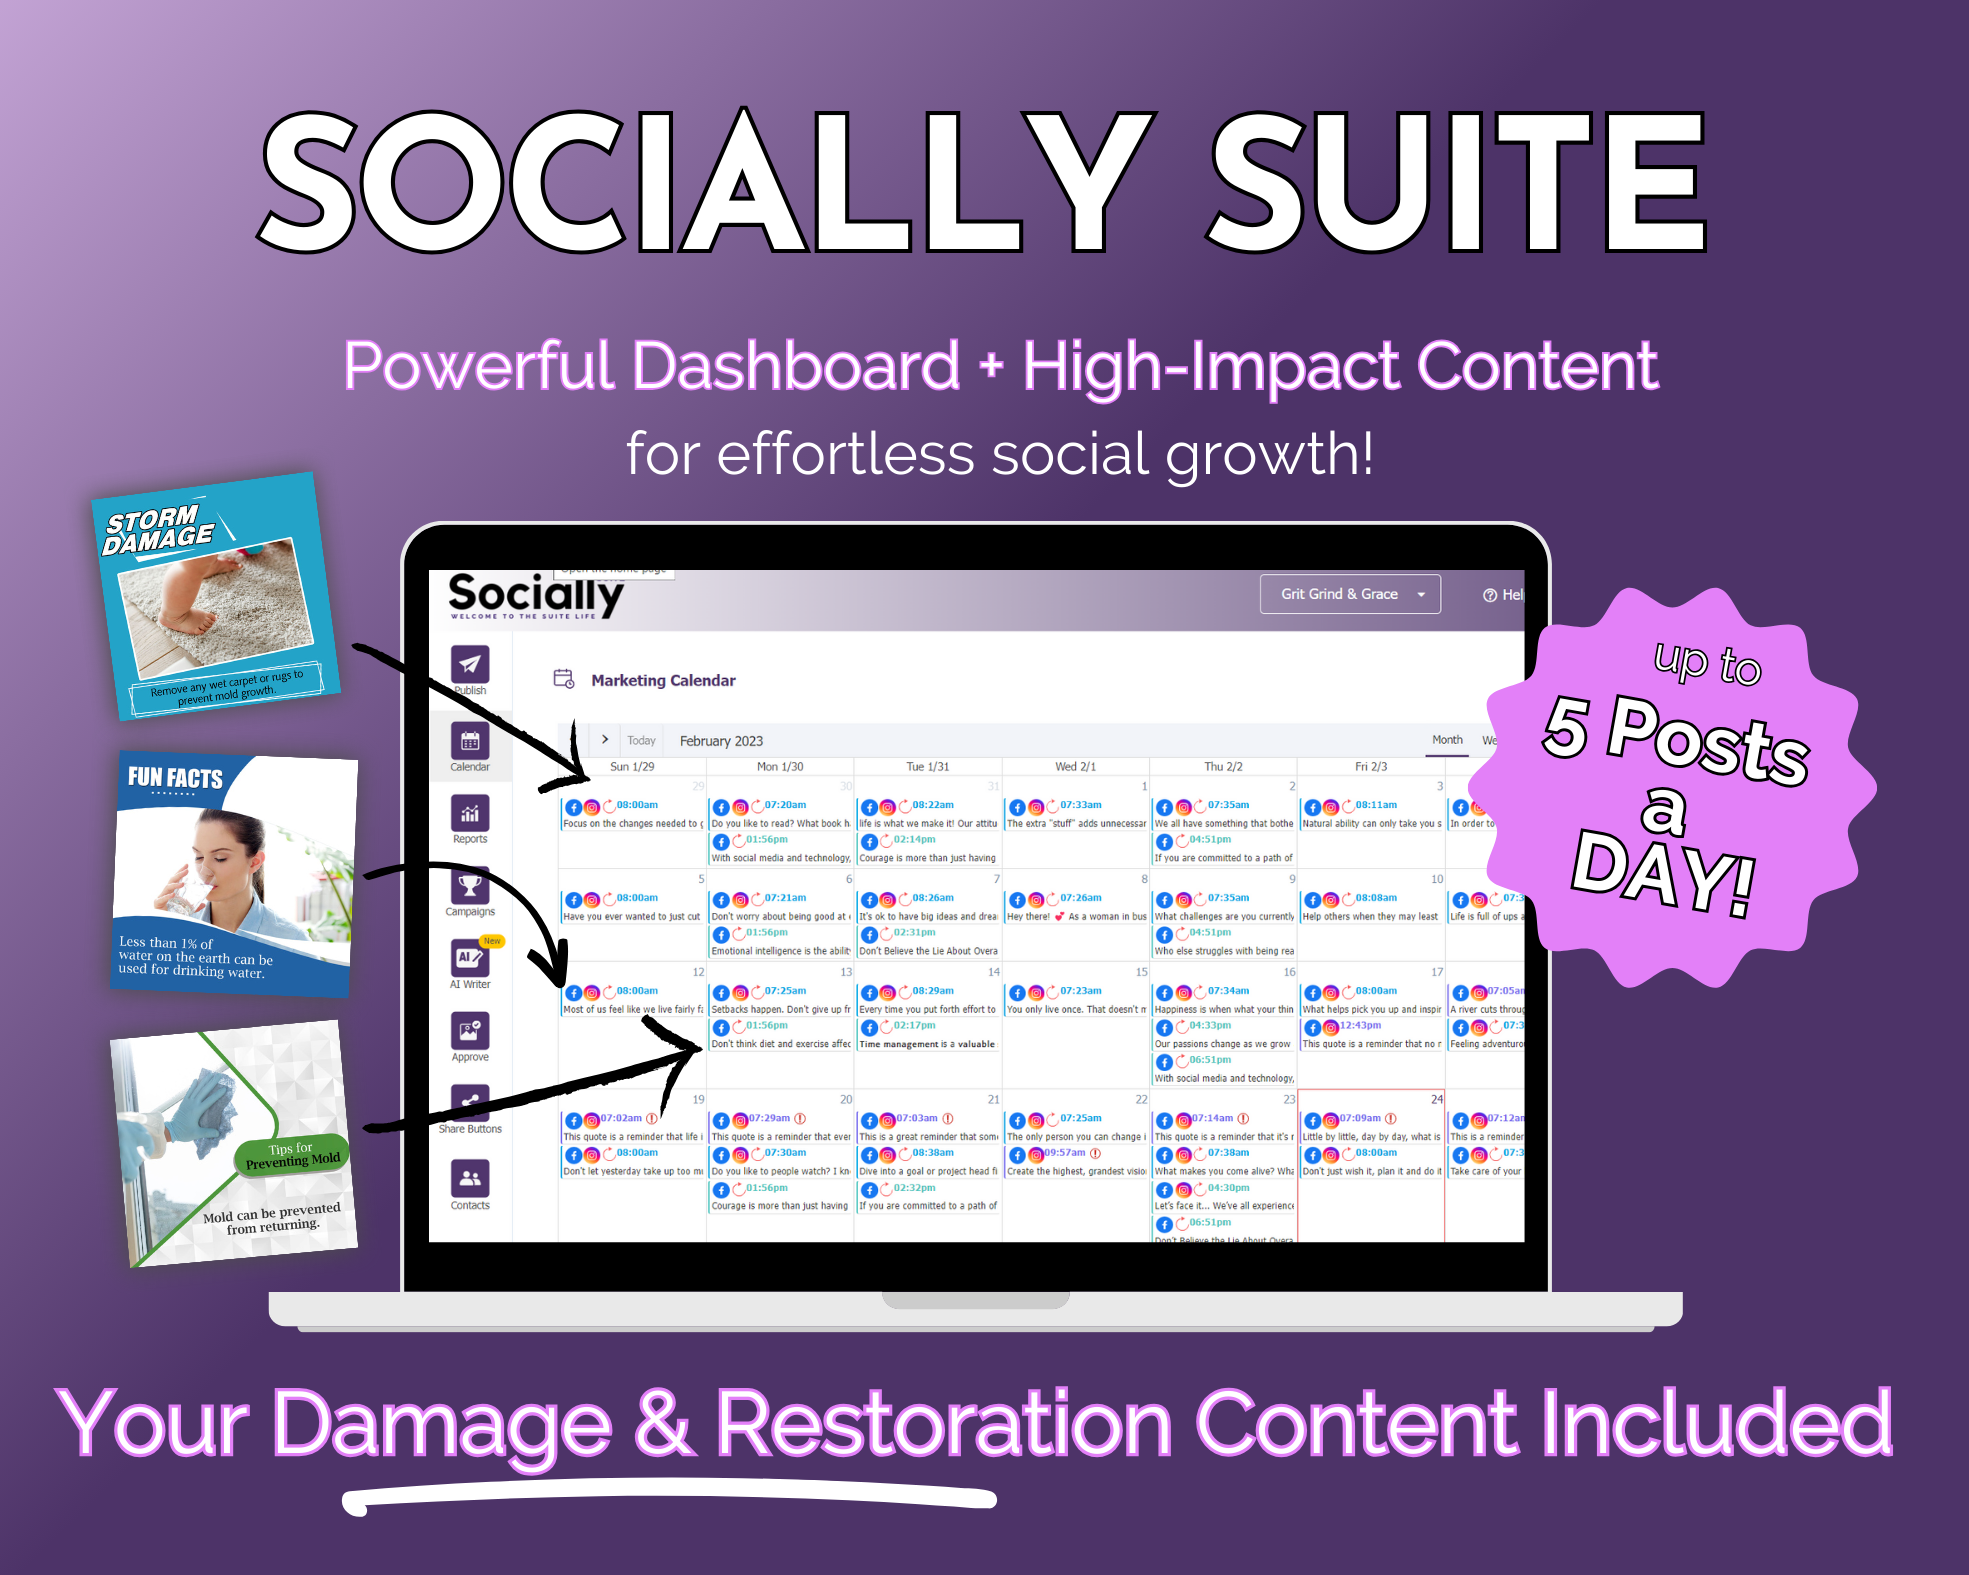 Get Socially Inclined's Socially Suite Membership advertisement showcasing a content dashboard and a promise of including specific content for damage and restoration, with a capability of up to 5 posts per day, enhancing your online presence.